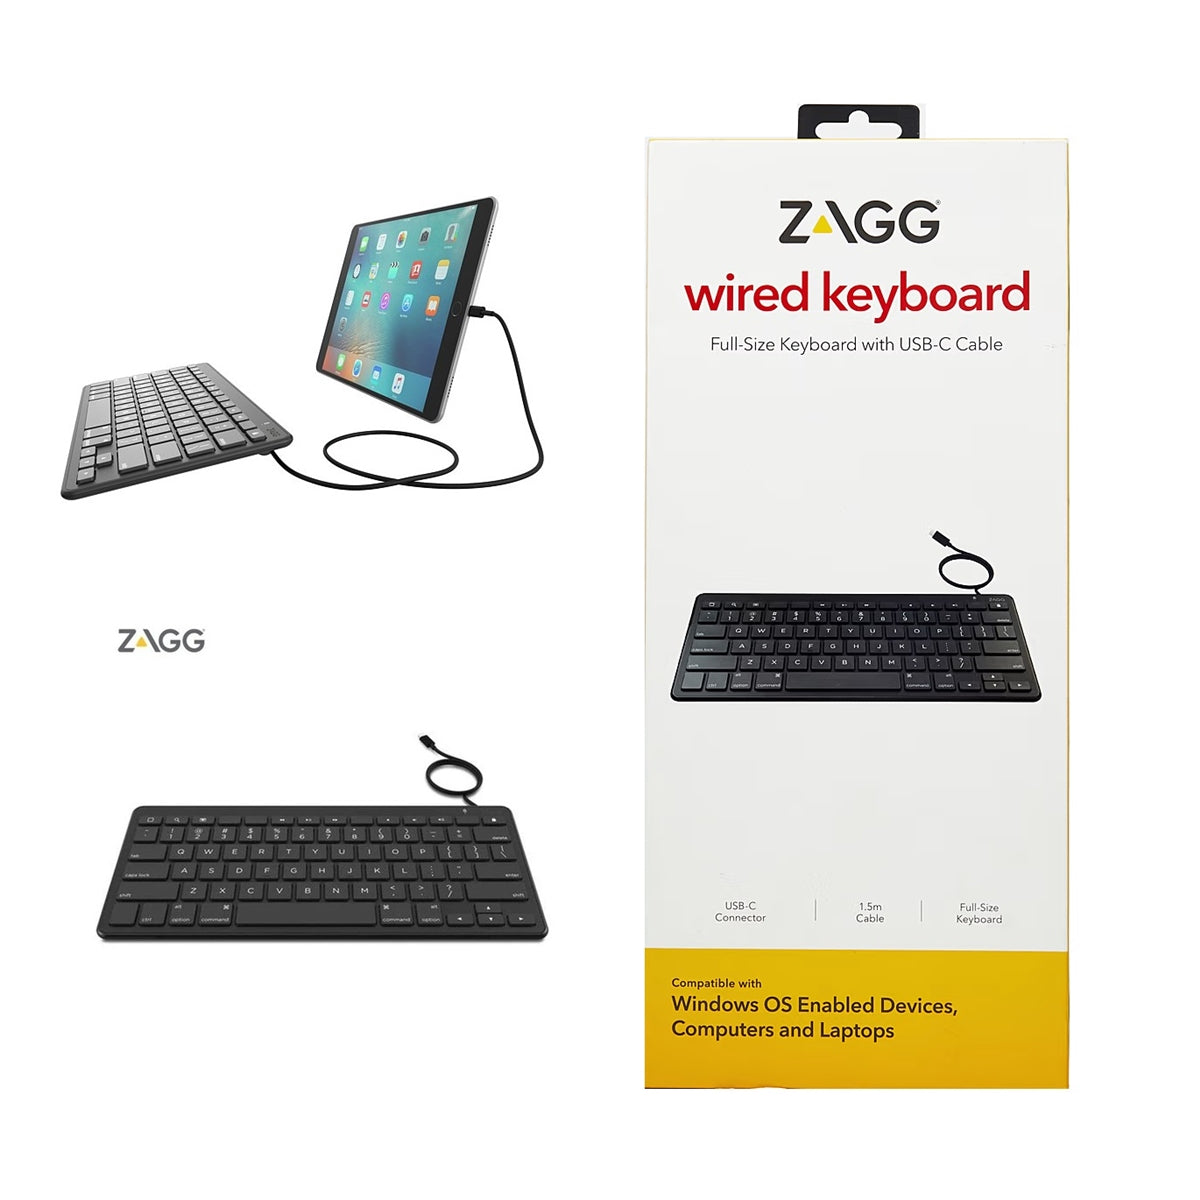 ZAGG Wired Keyboard Lightning Connector for iPhone iPad MFi-Certified